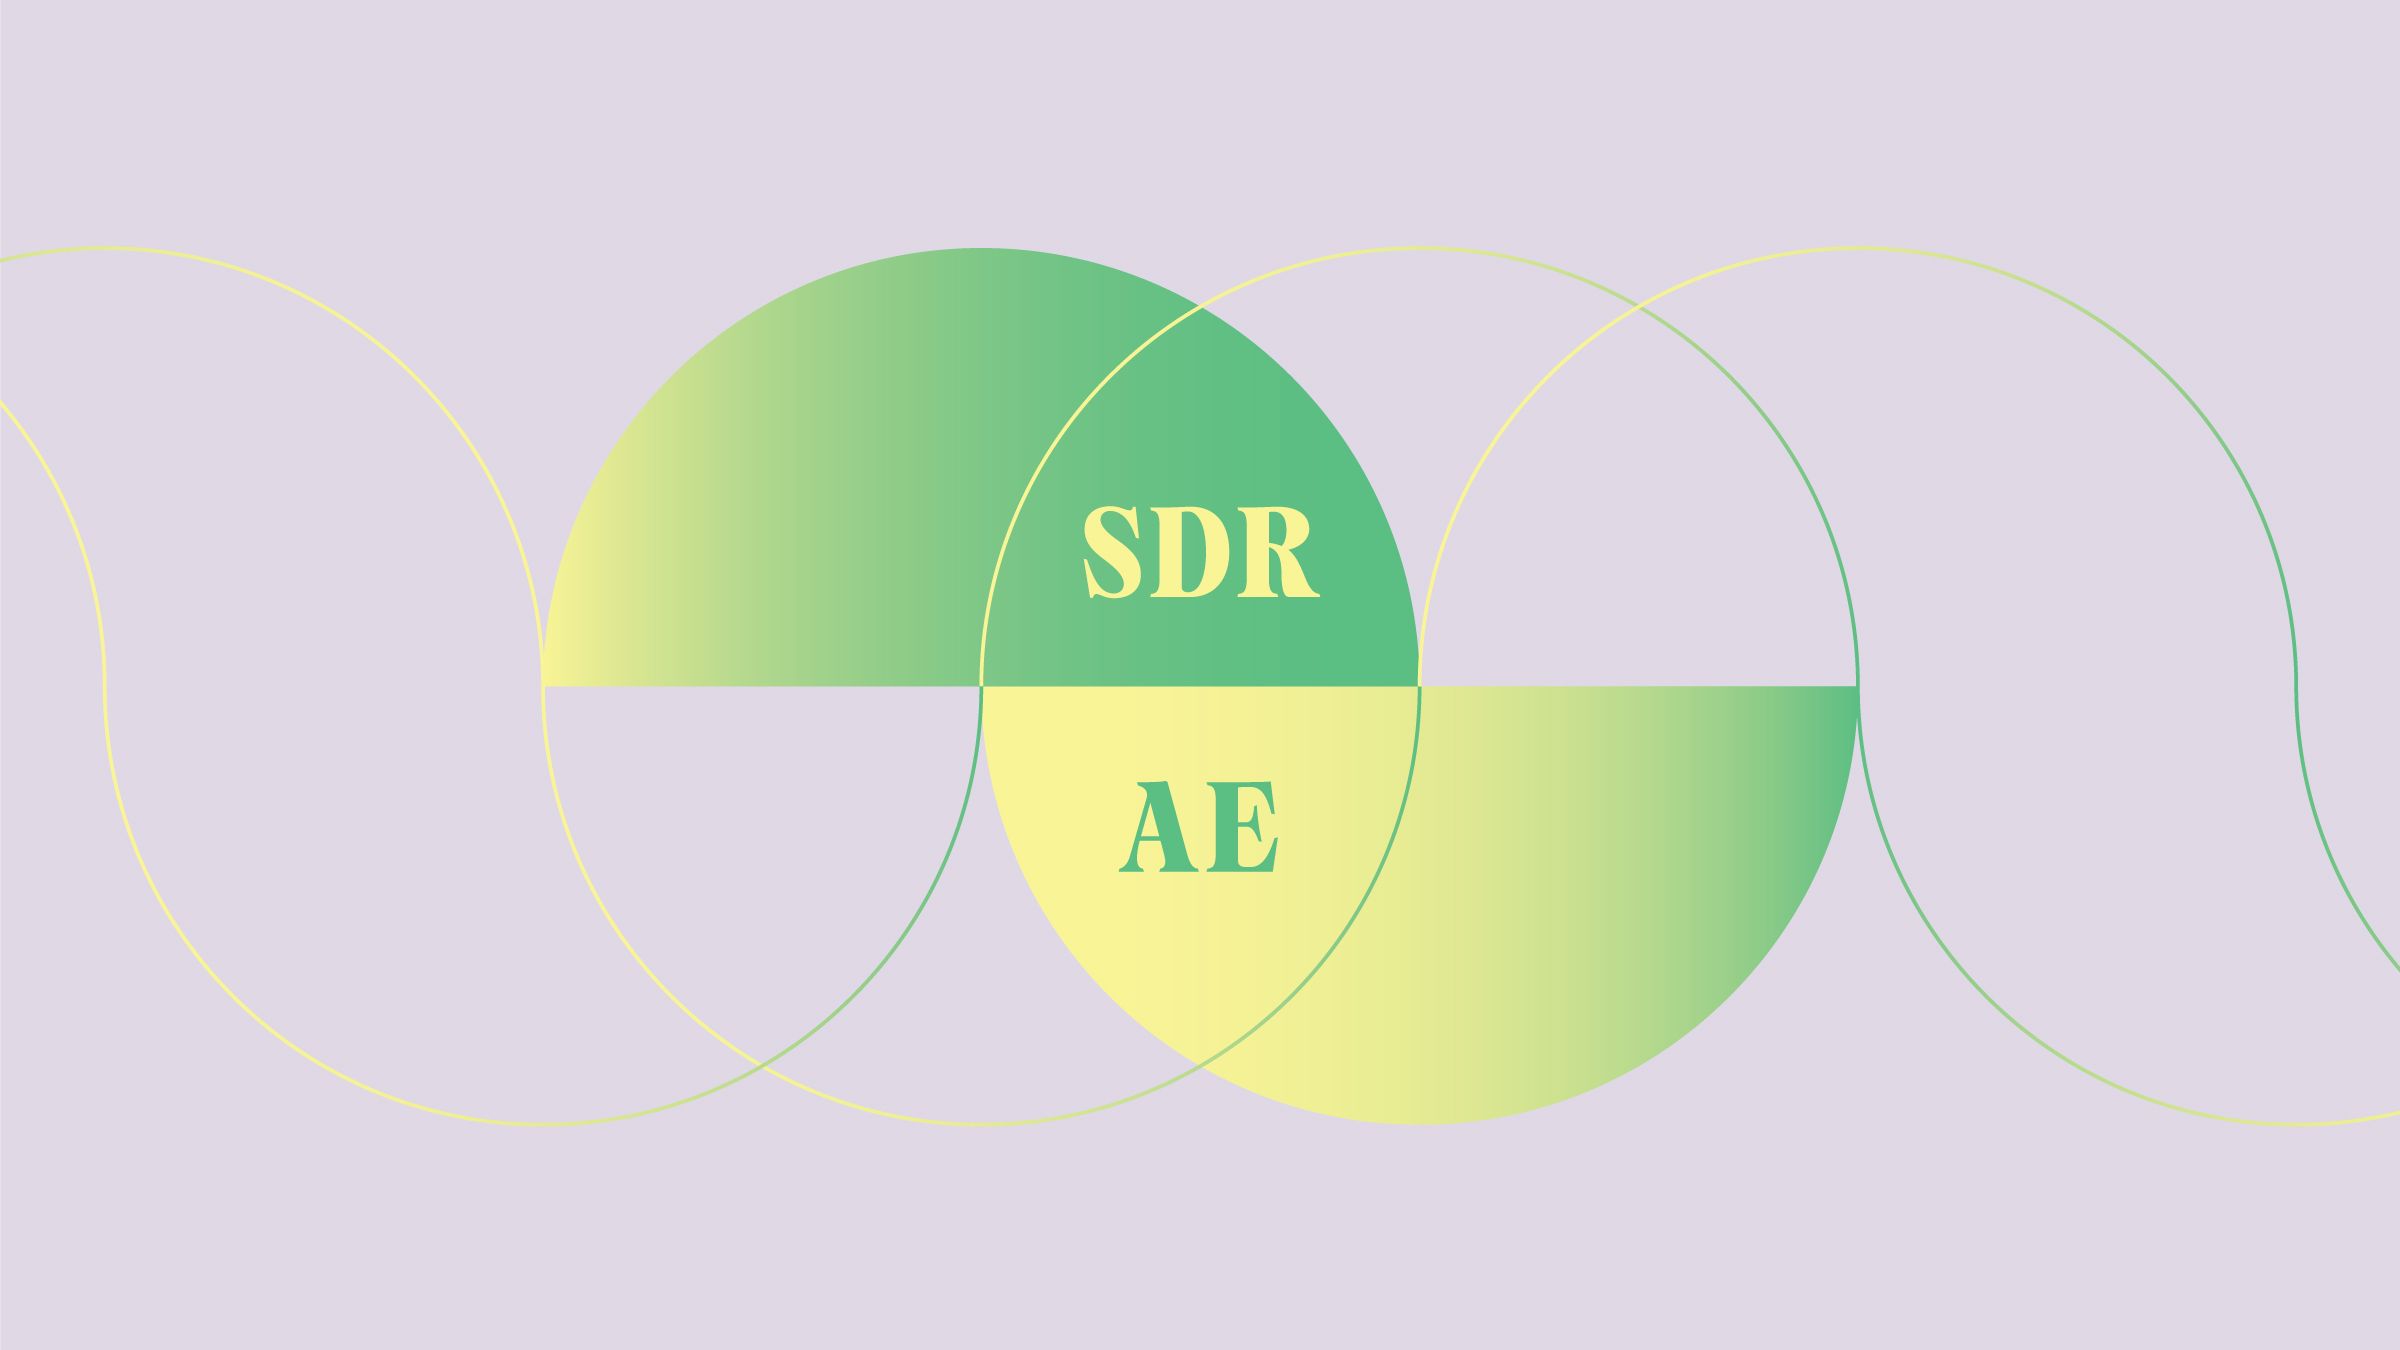 Breyta cover image with green and gold circles and waves with "SDR AE" written in the center.